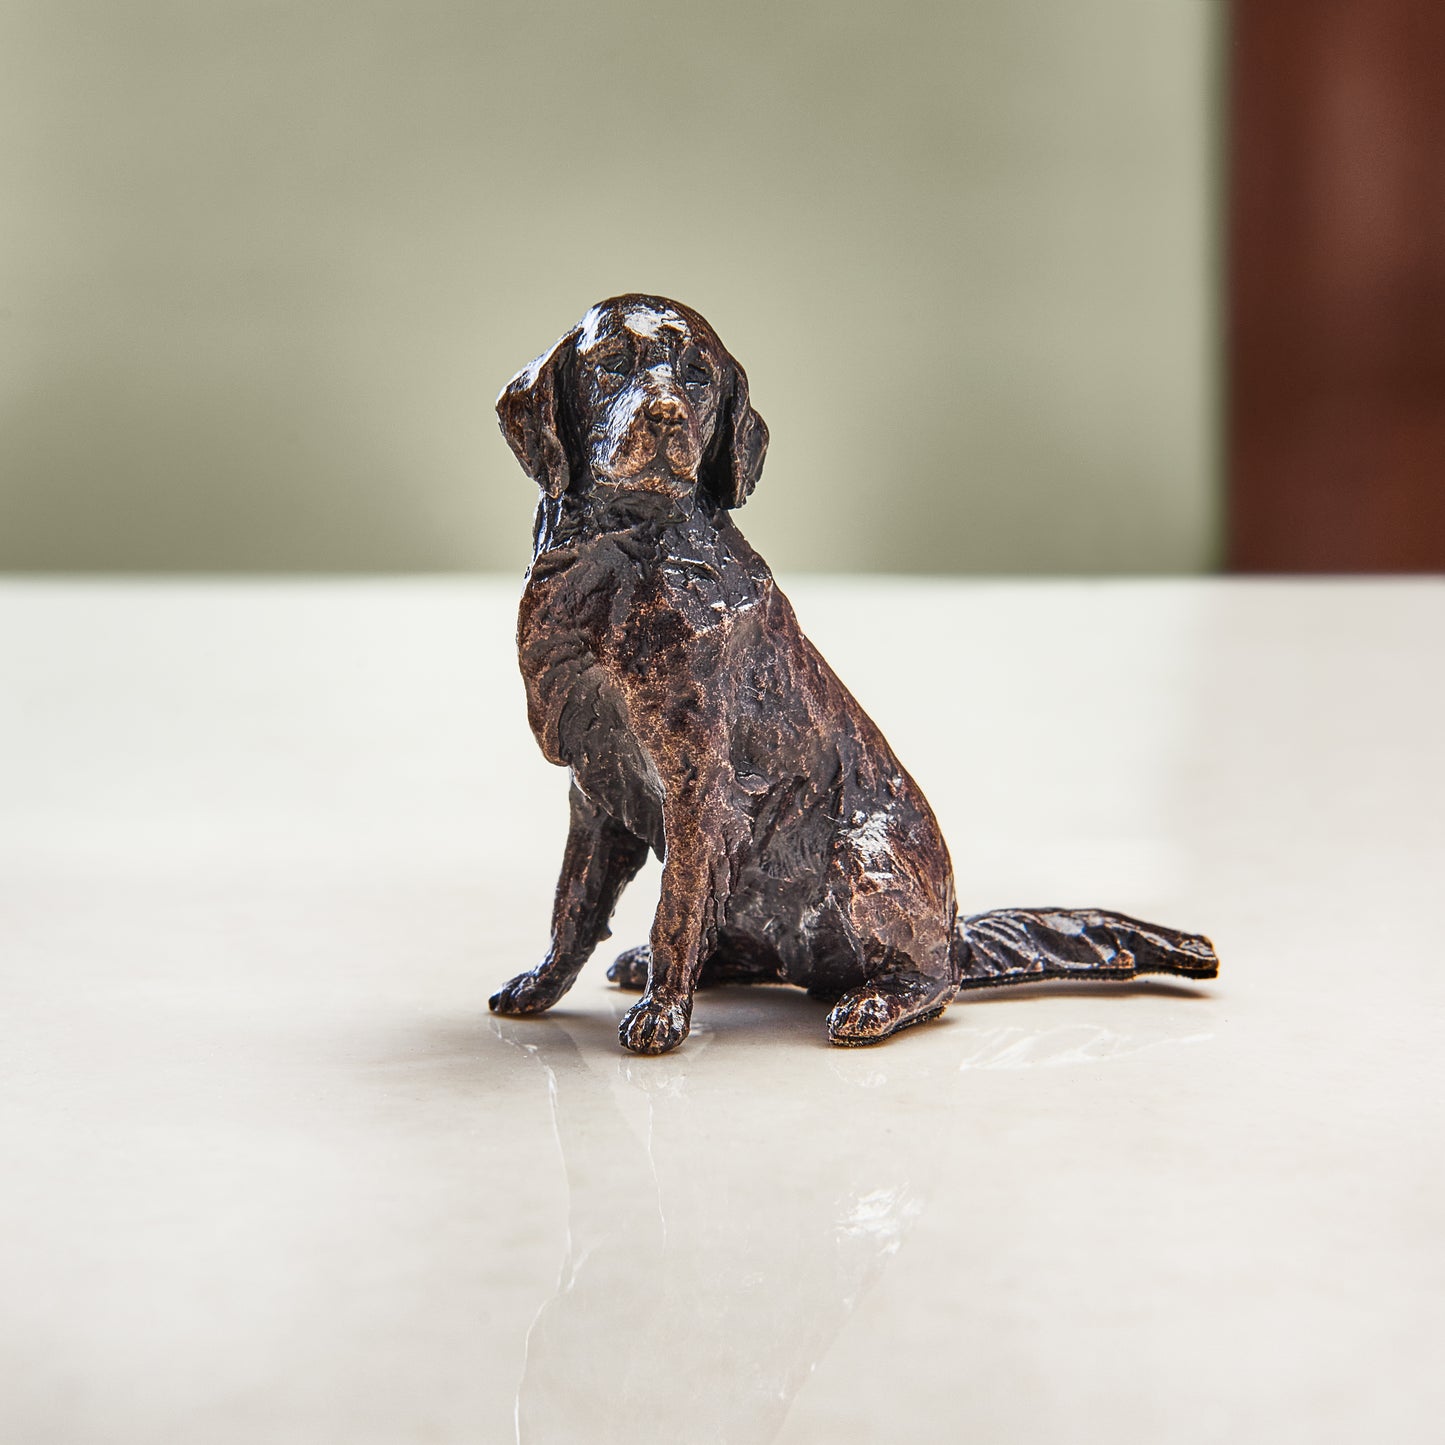 Miniature bronze figurine of a retriever. A thoughtful bronze anniversary gift or birthday gift for dog lovers.